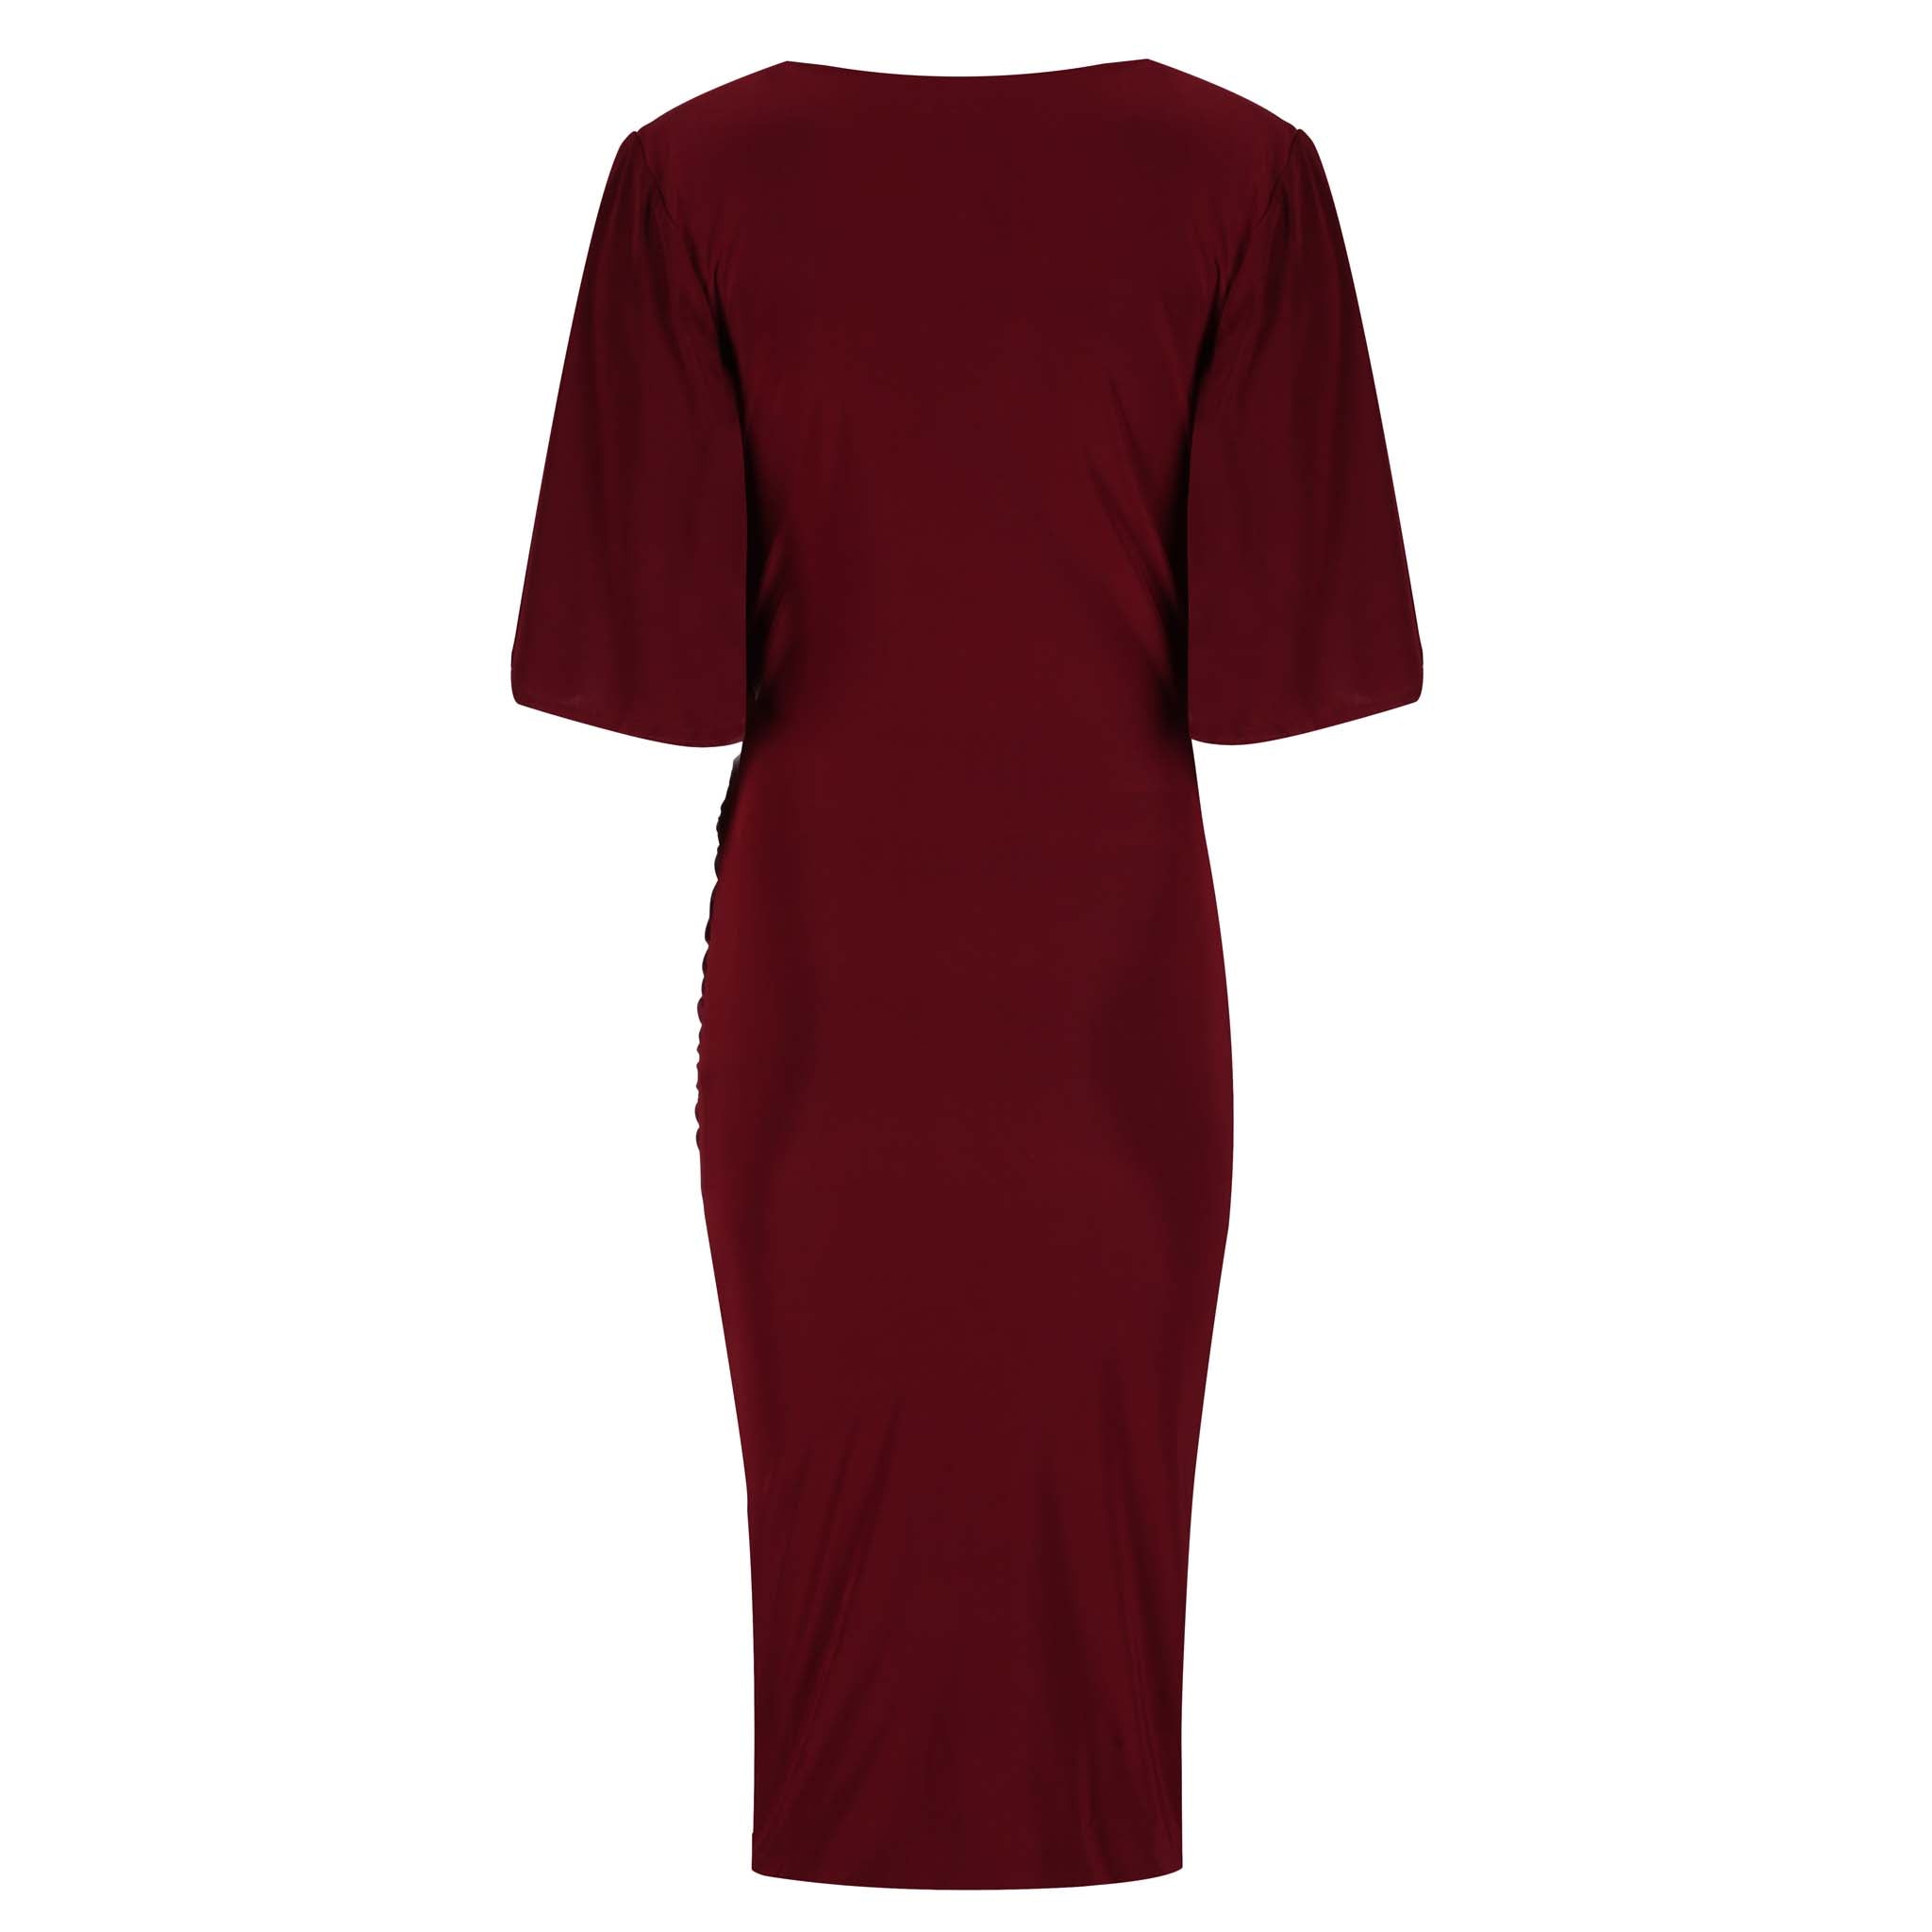 Burgundy Wine Red Butterfly Sleeve Slinky Pencil Cocktail Dress